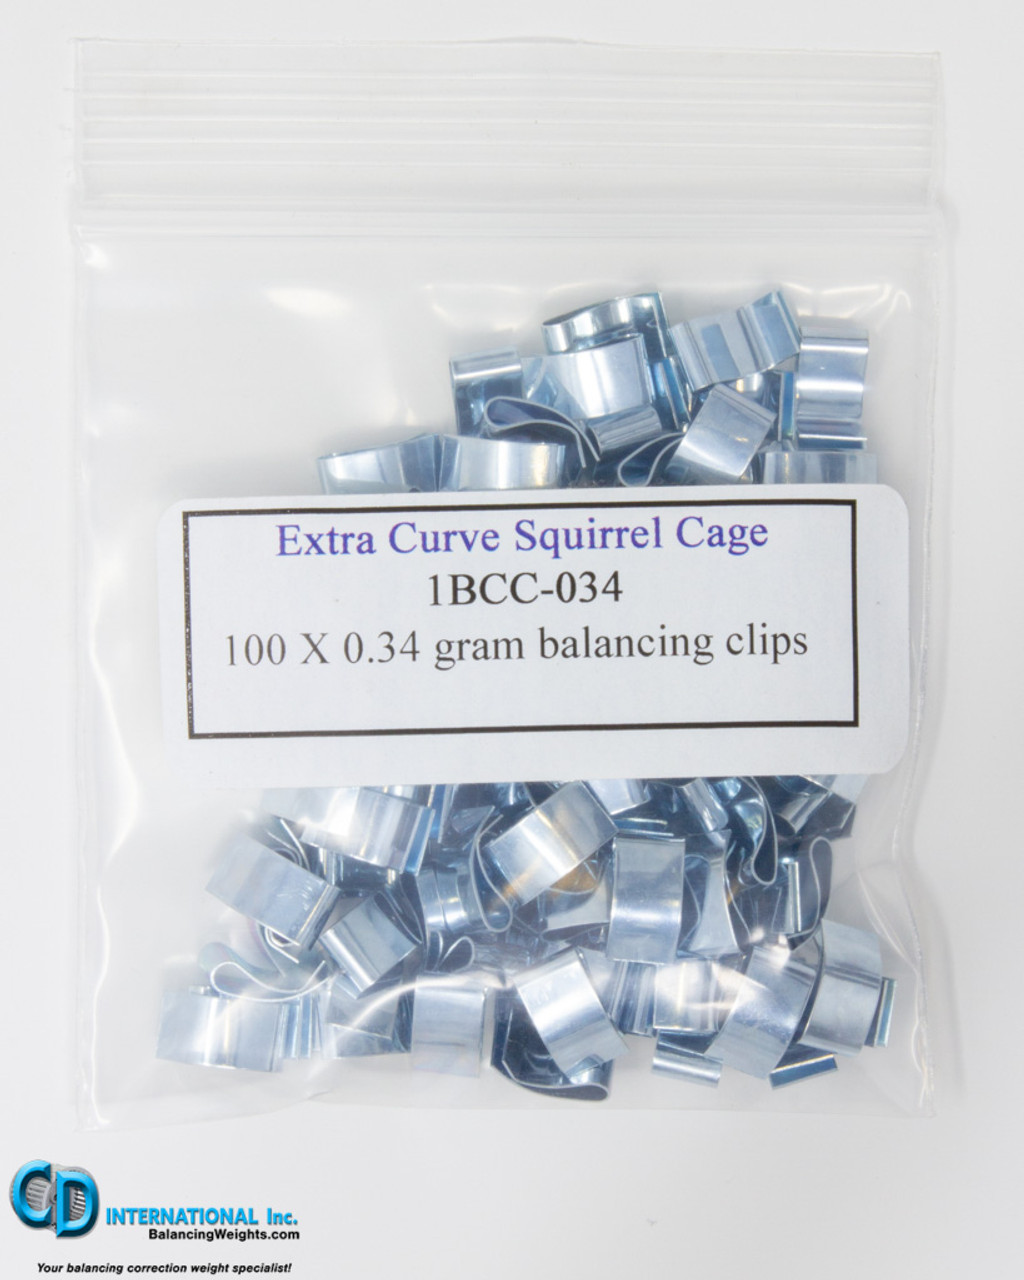 0.34 gram Extra Tight Curve Squirrel Cage Balancing Clips 100 pack